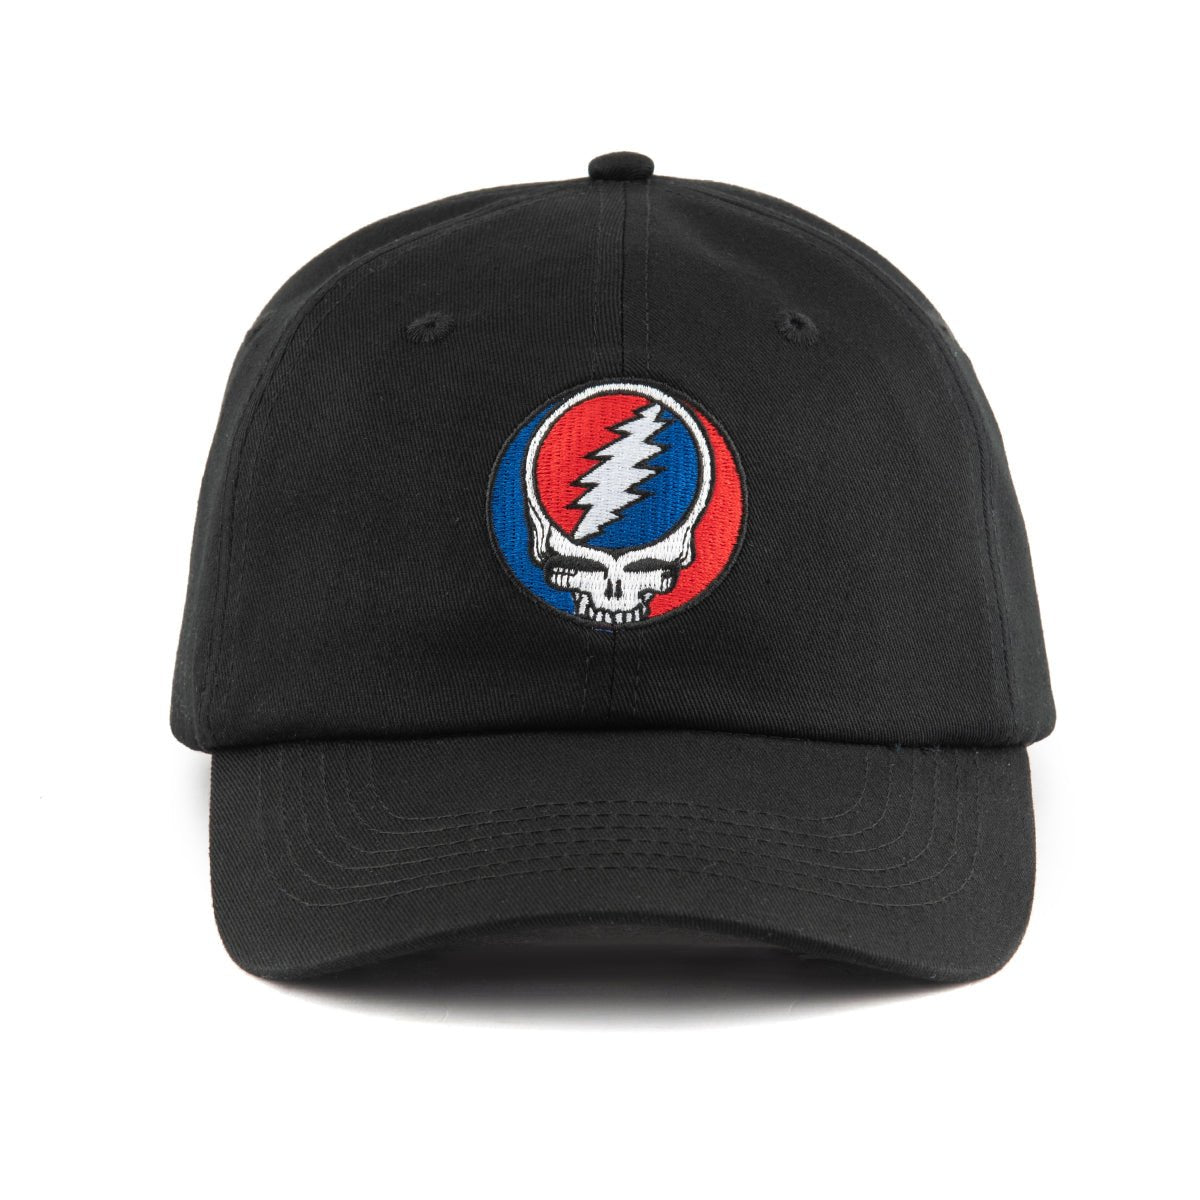 Grateful Dead x TGR Steal Your Face Dad Hat - Teton Gravity Research